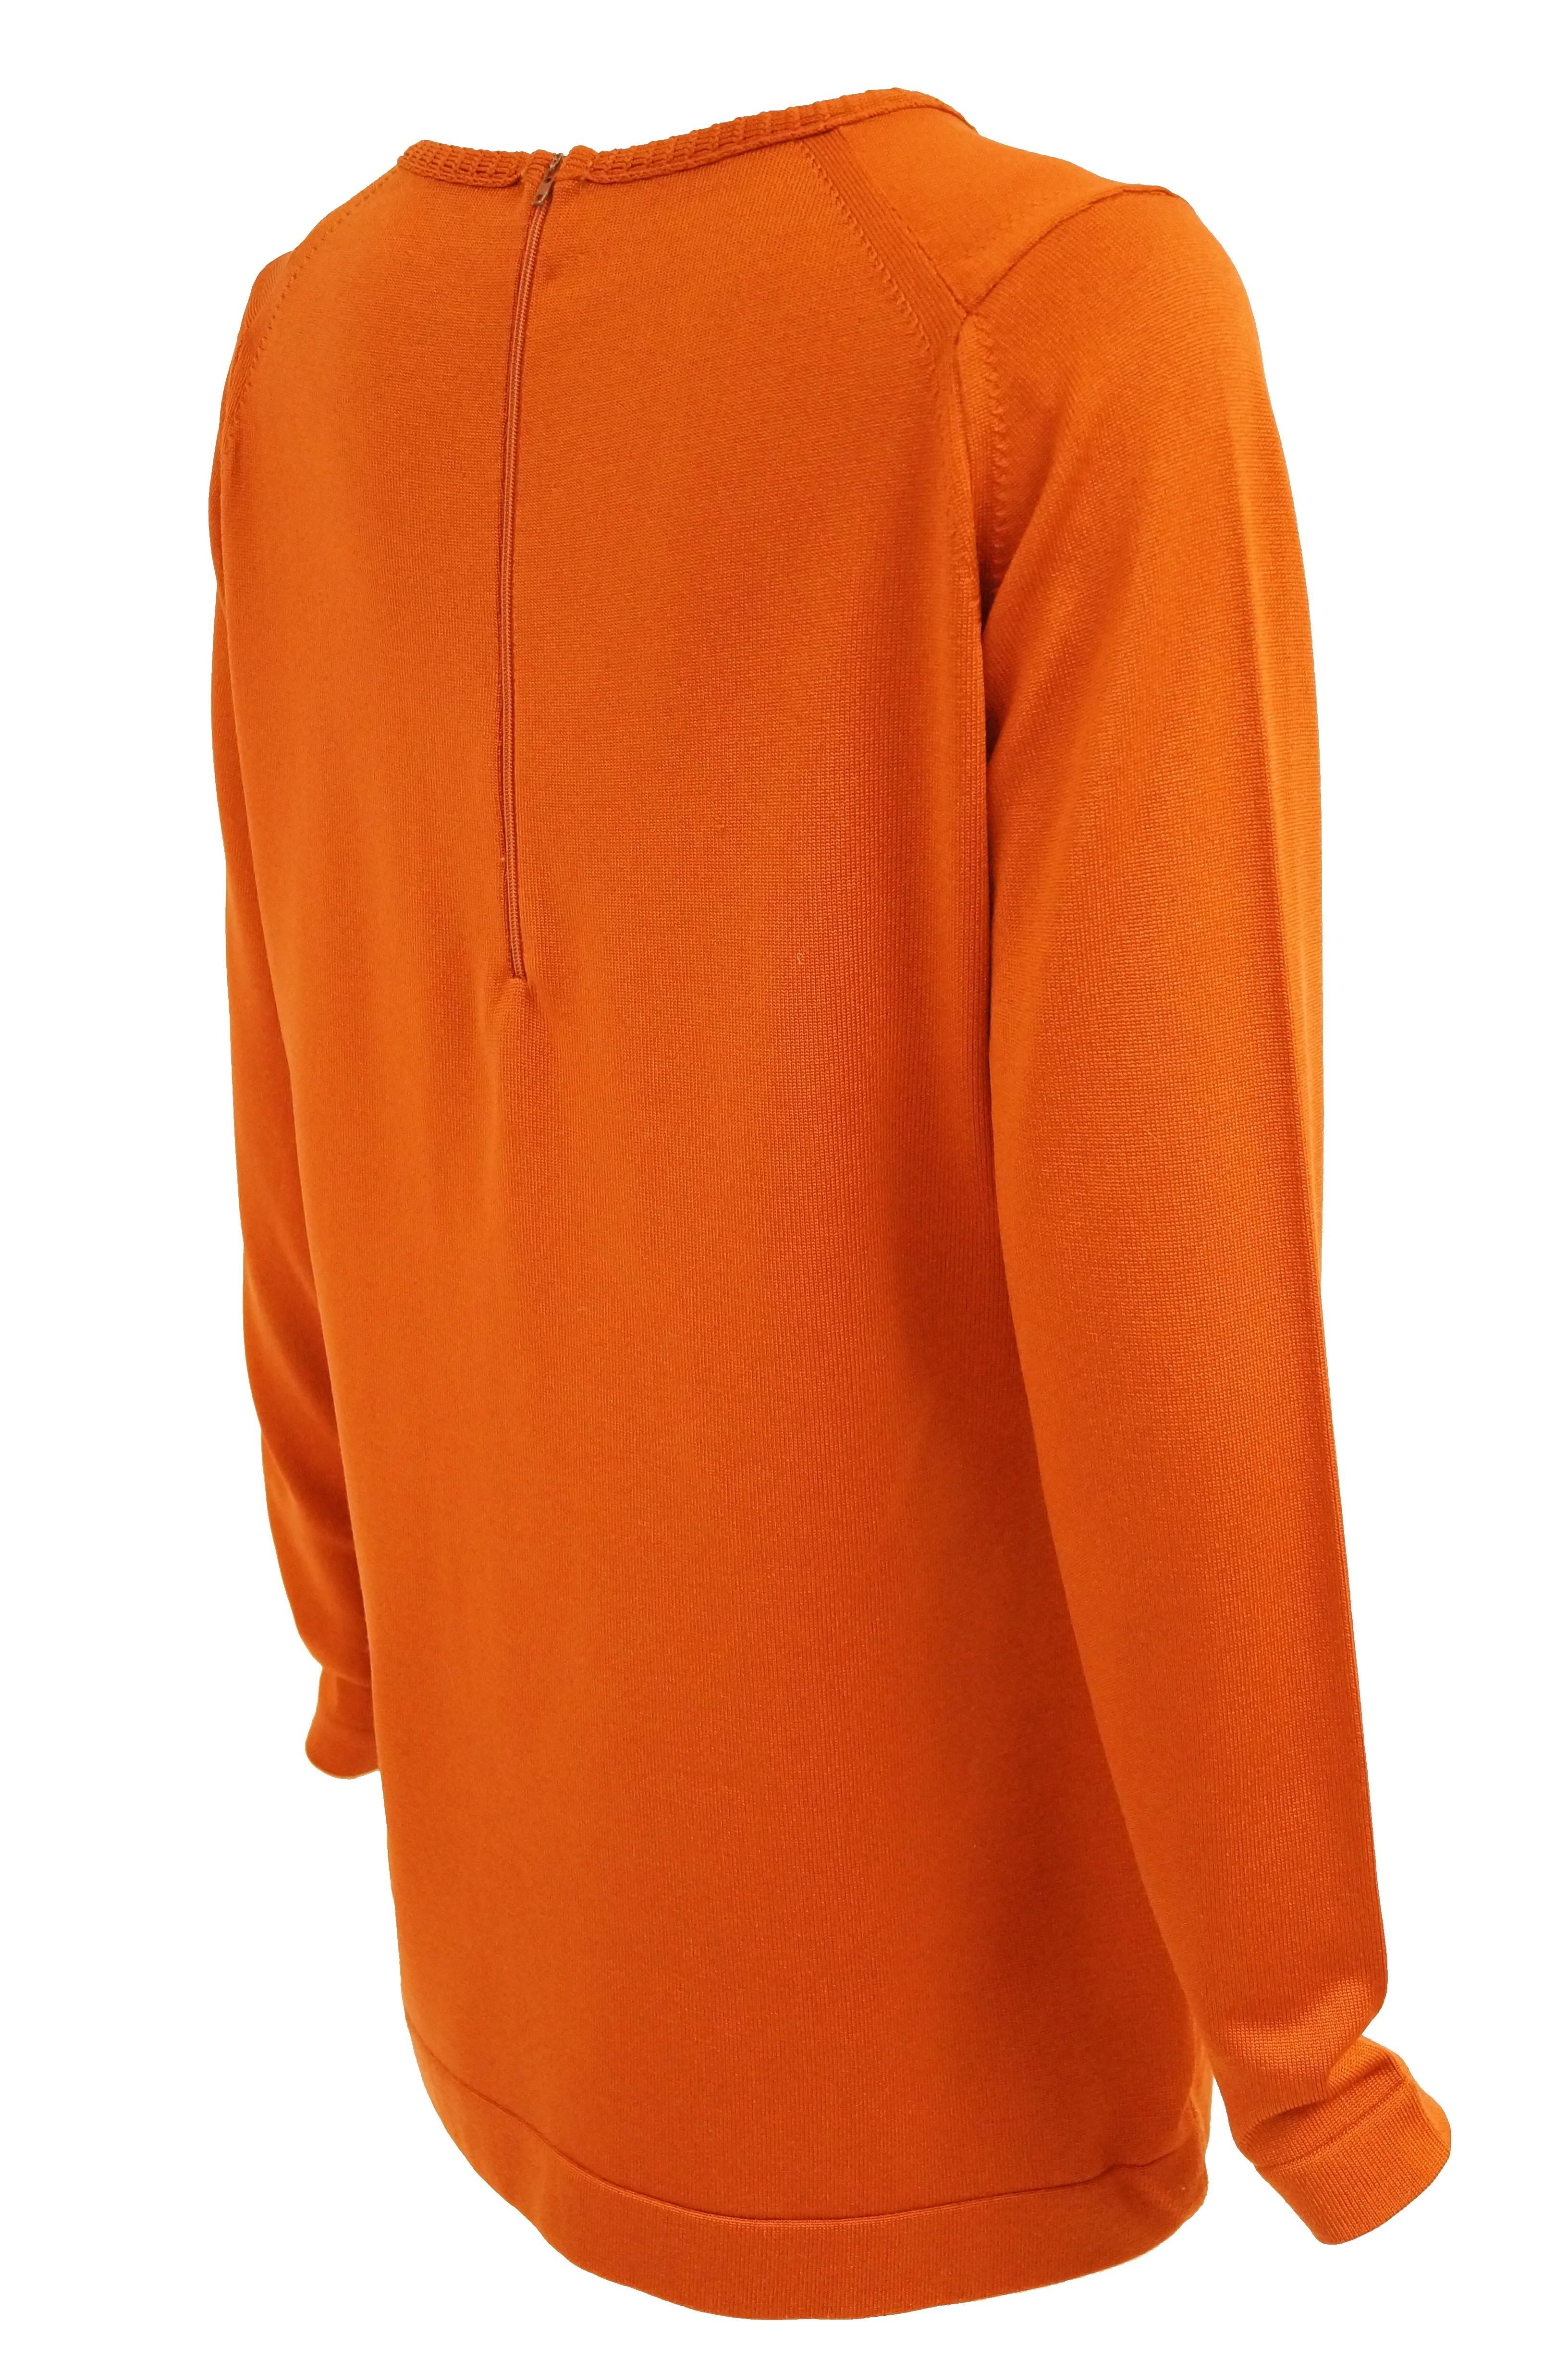 Givenchy Sport Tangerine Orange Pullover Sweater, 1970s  3